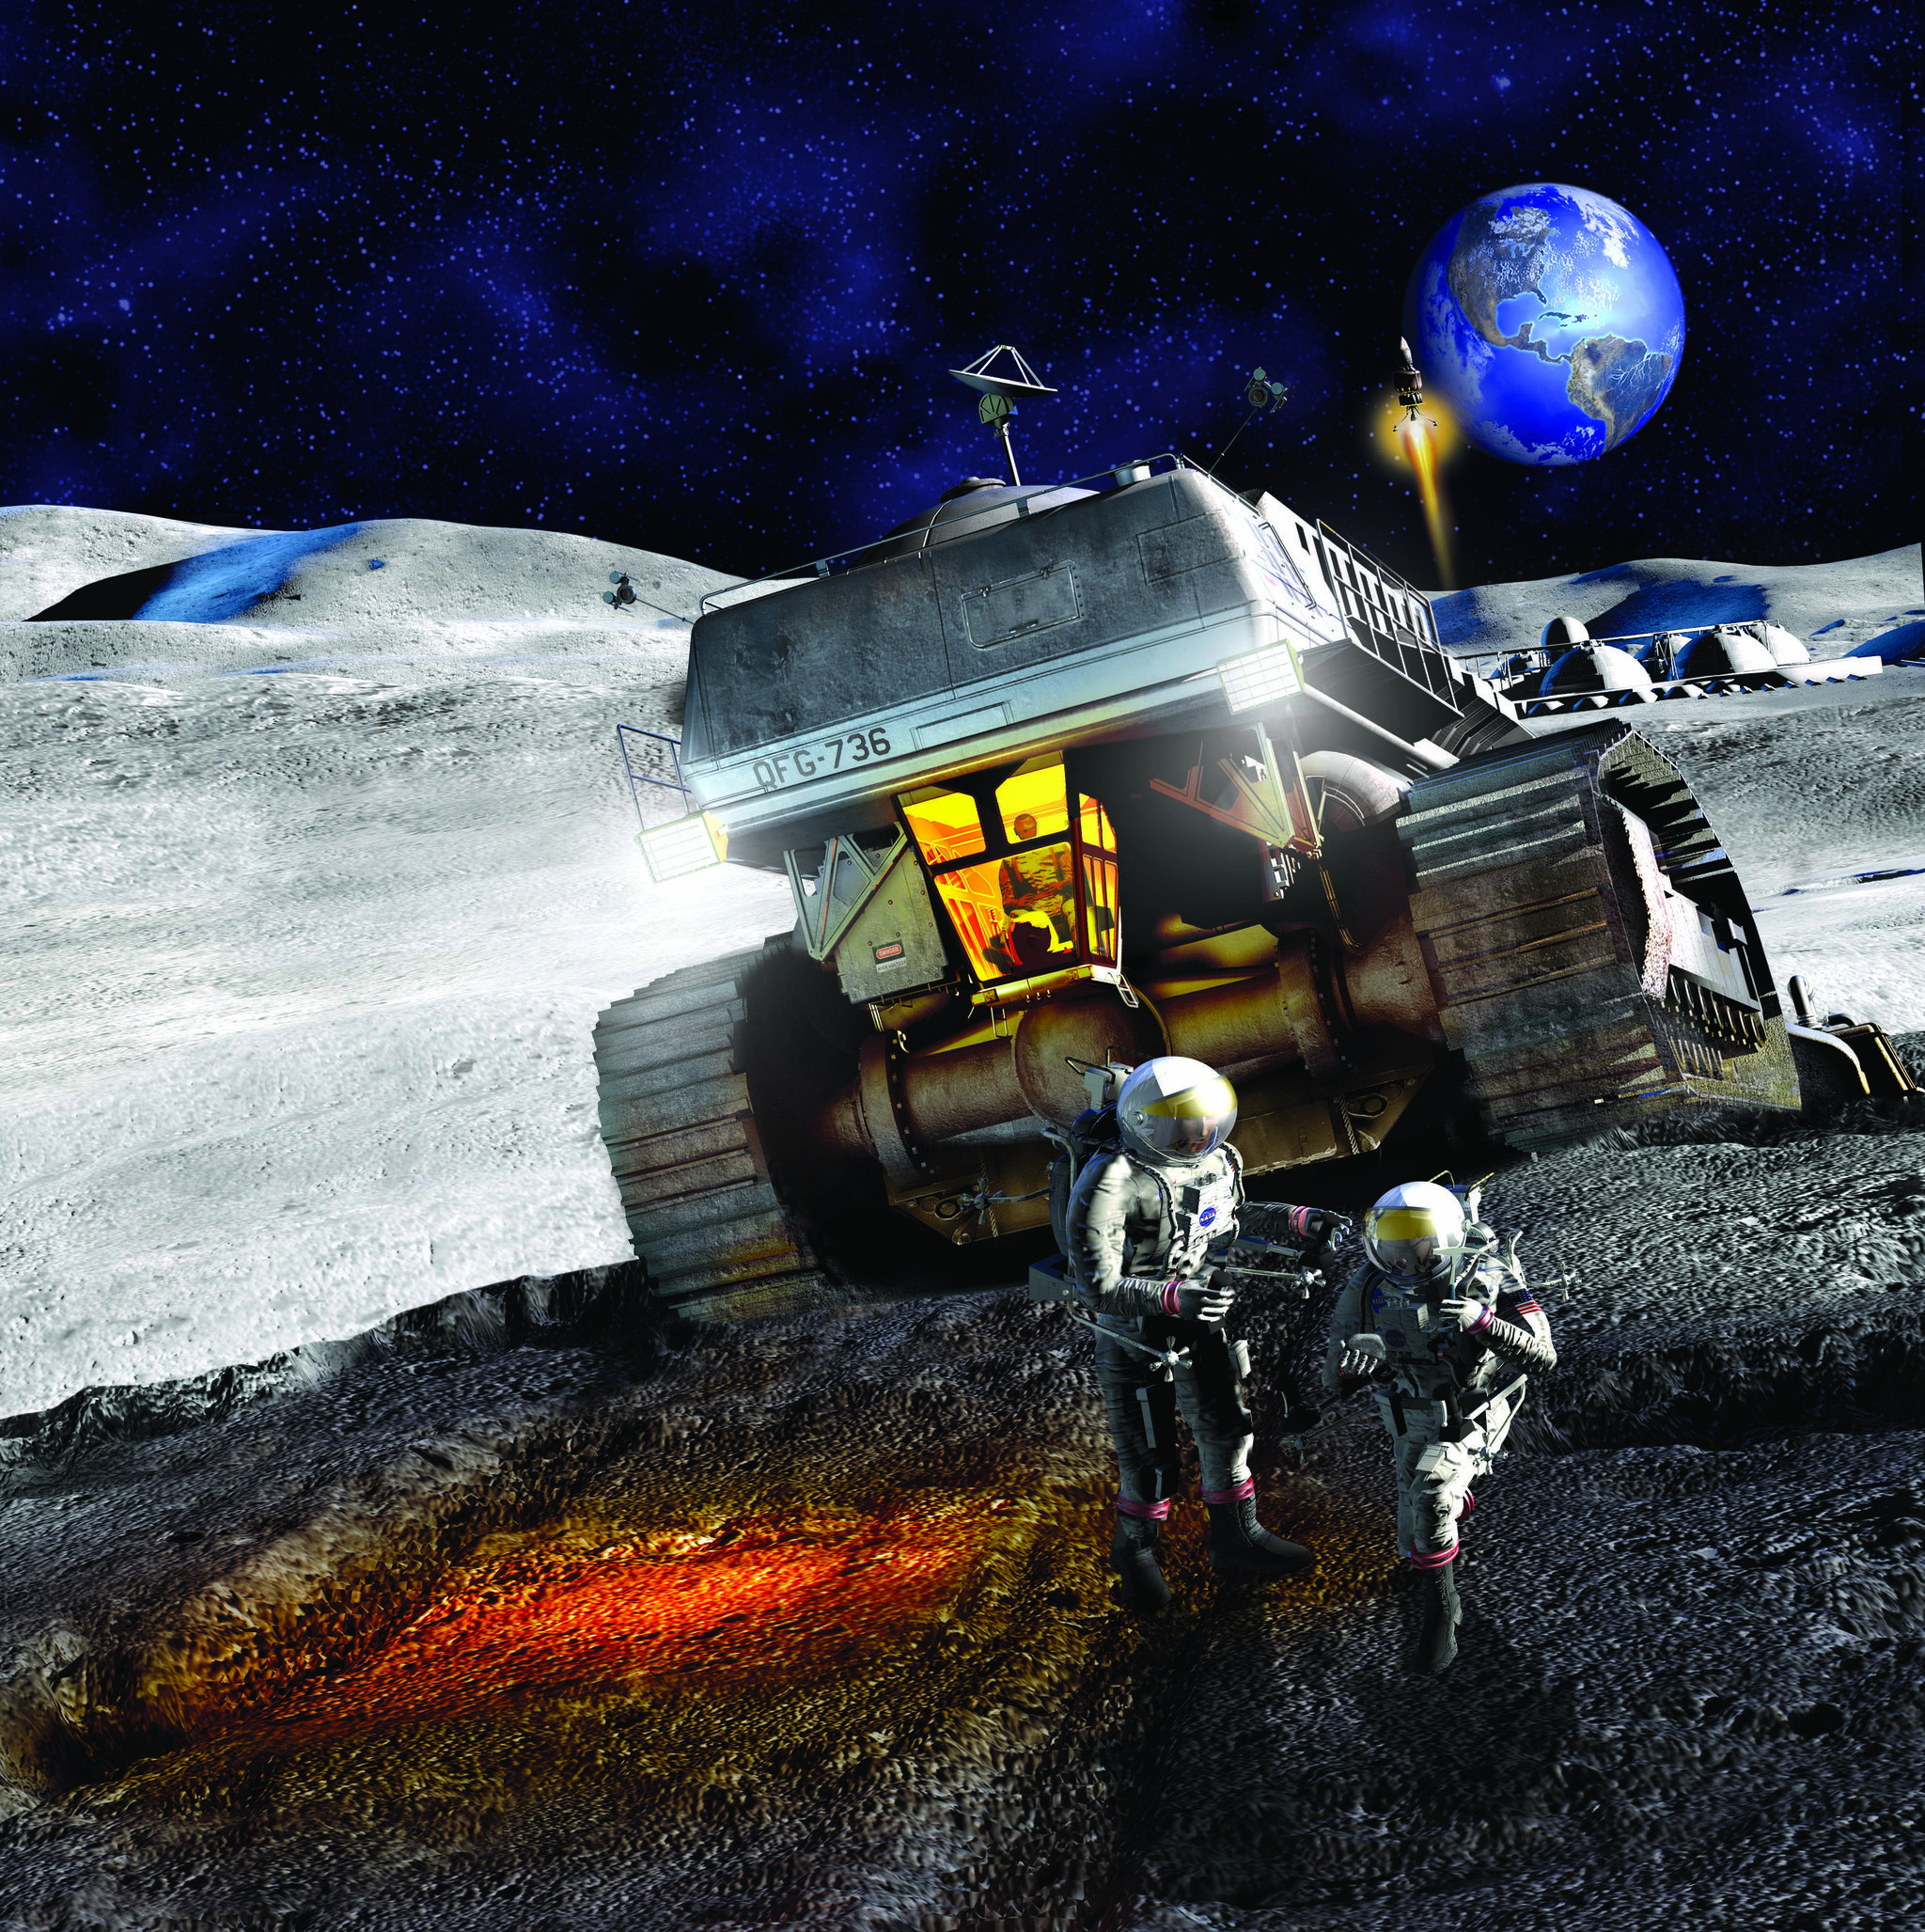 an illustration of lunar mining from the october 2004 cover of popular mechanics﻿